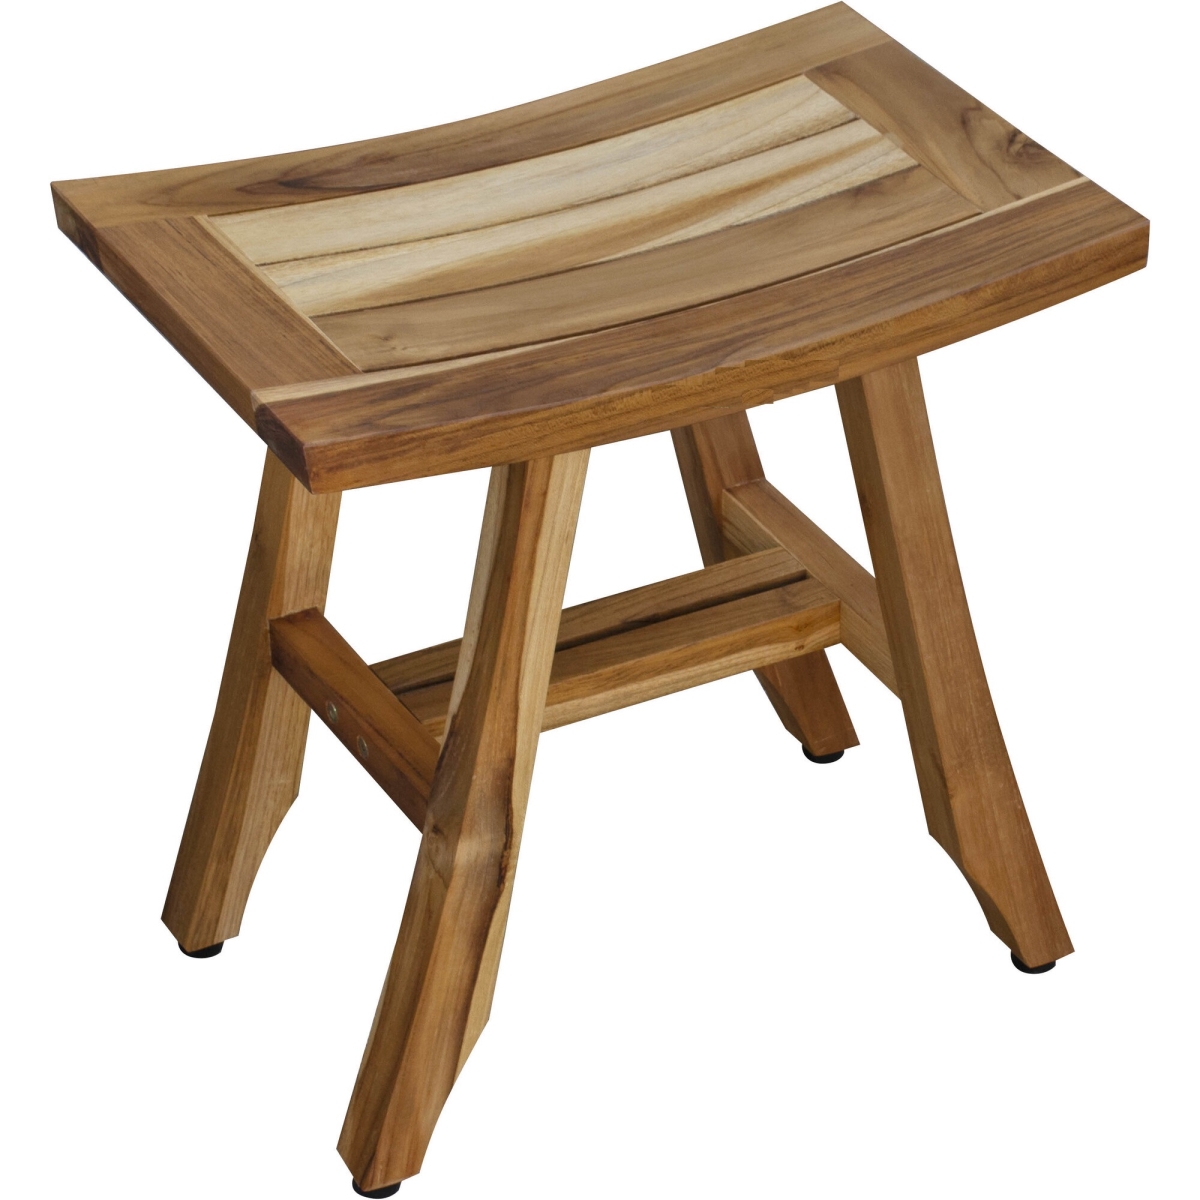 Picture of HomeRoots Furniture 376745 Compact Rectangular Teak Shower or Outdoor Bench - Natural Finish - 18 x 12 x 18 in.